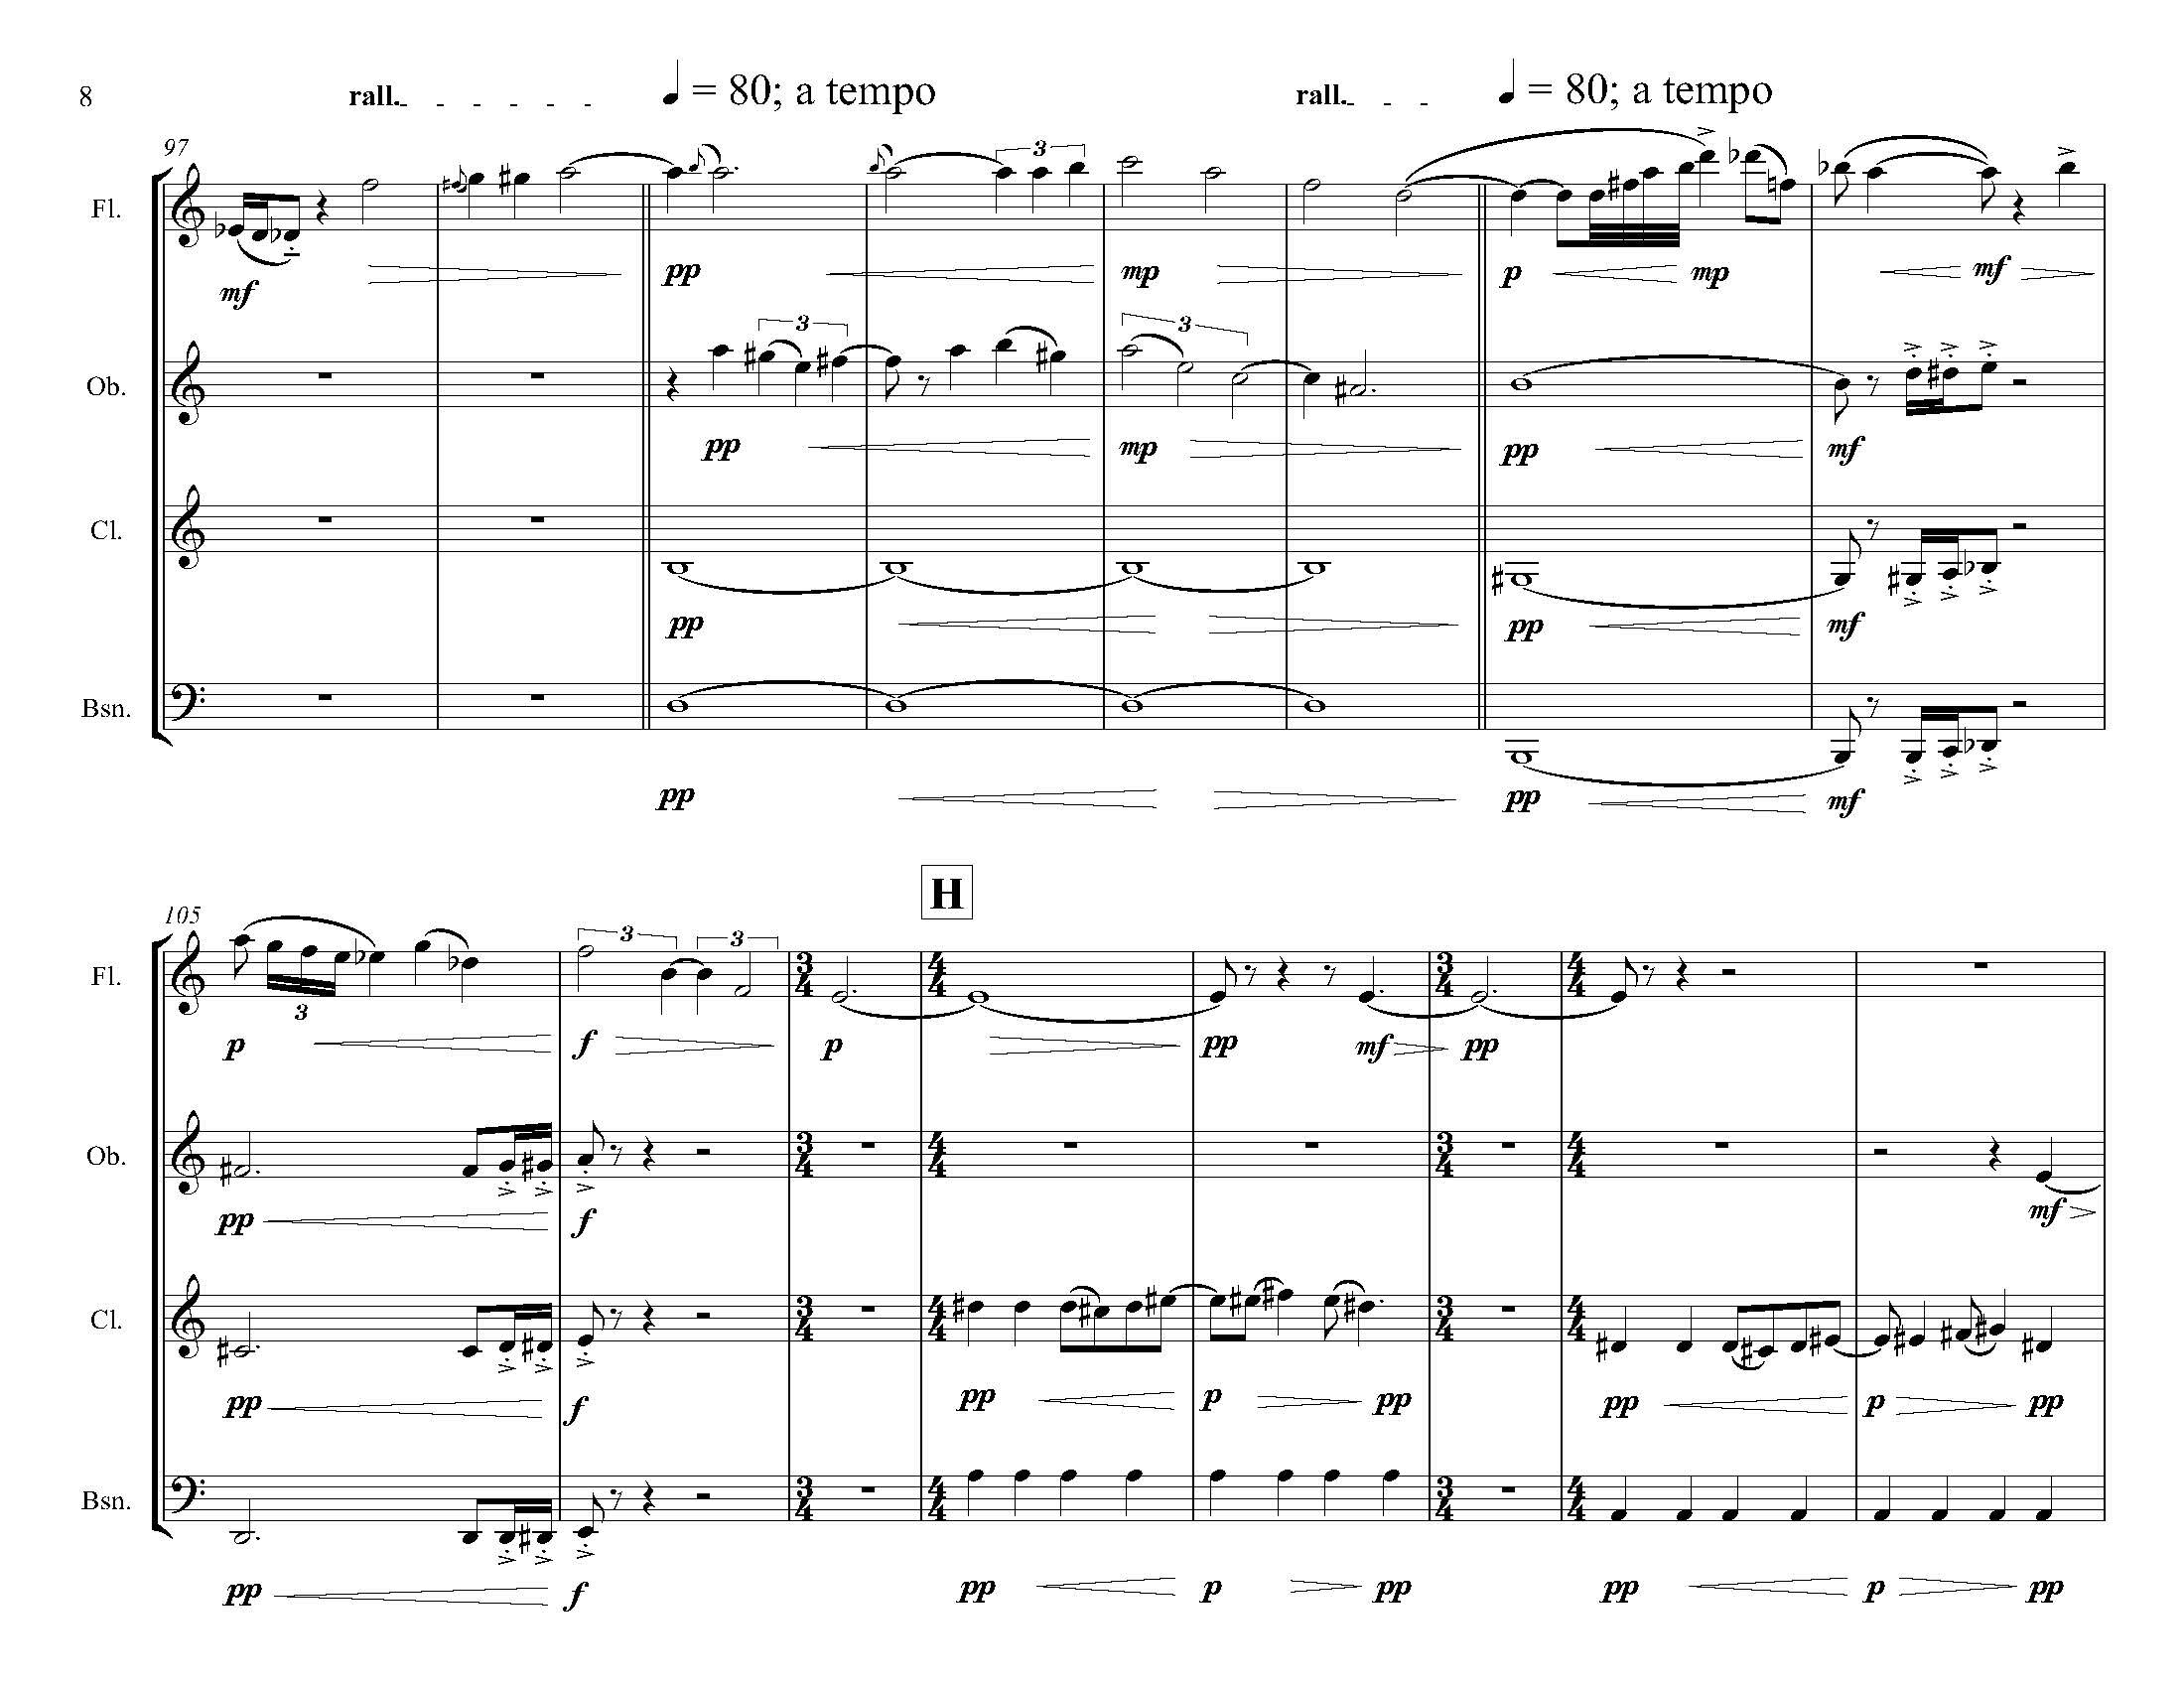 March the Twenty-Fifth - Complete Score_Page_14.jpg